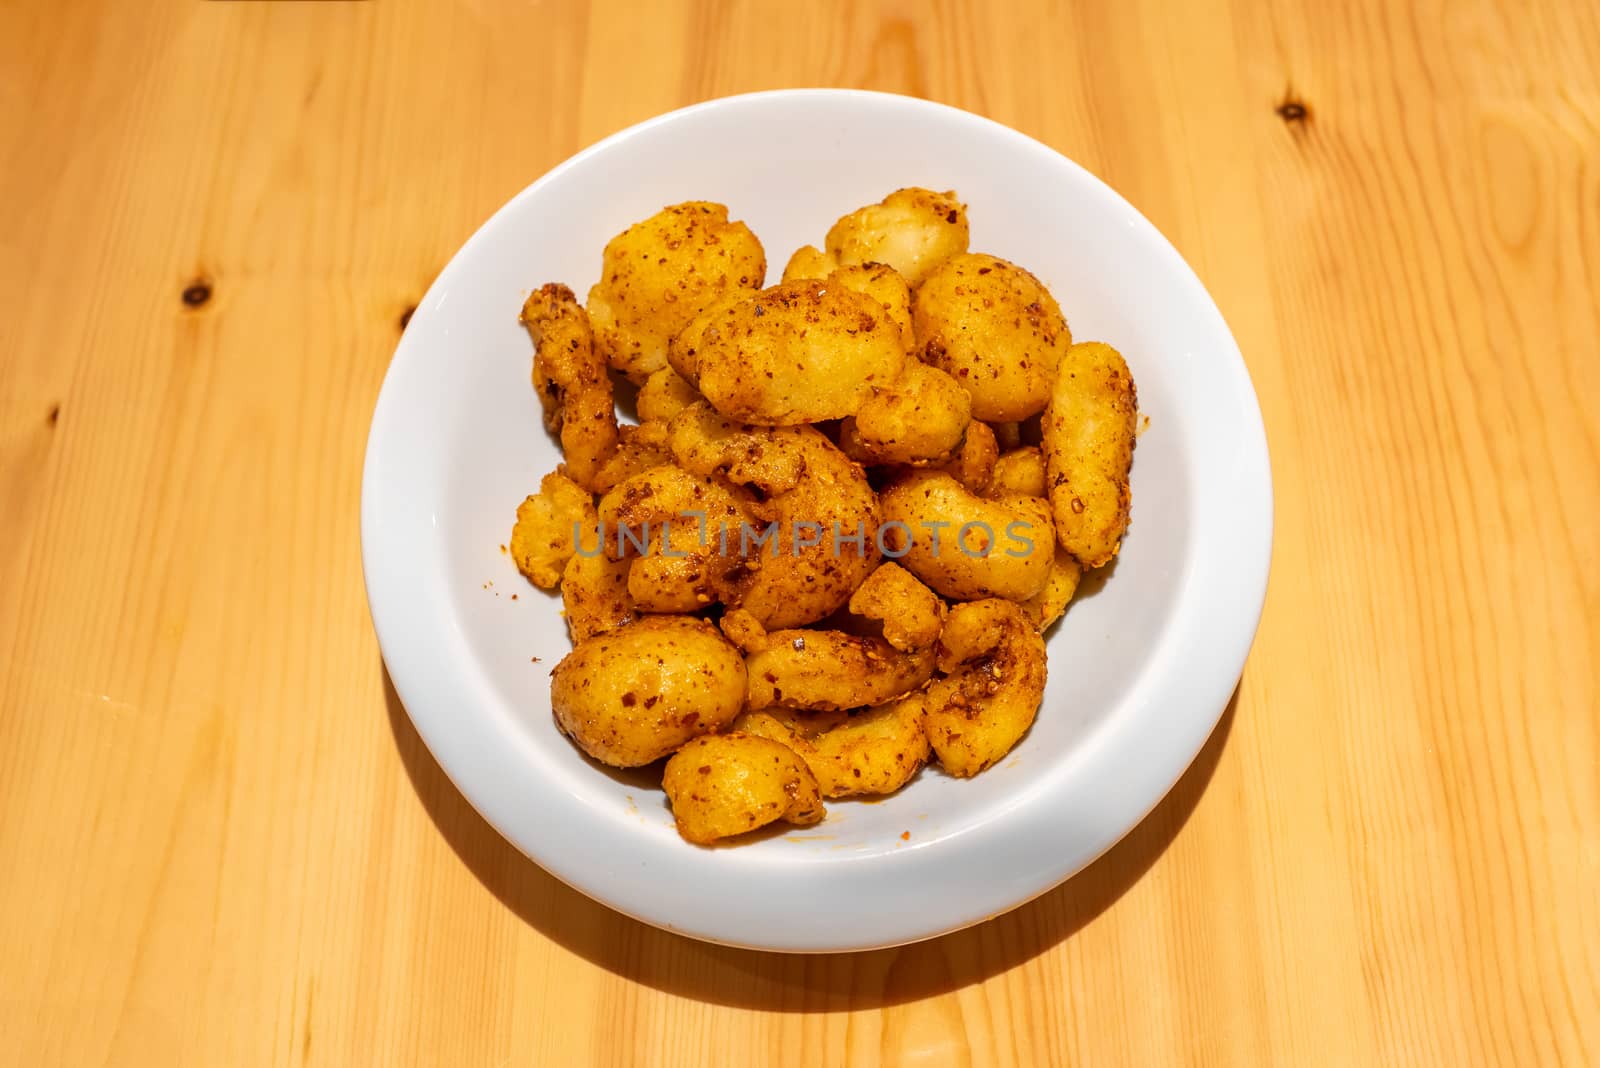 Fried potatoes with spice in a white plate - Chinese food